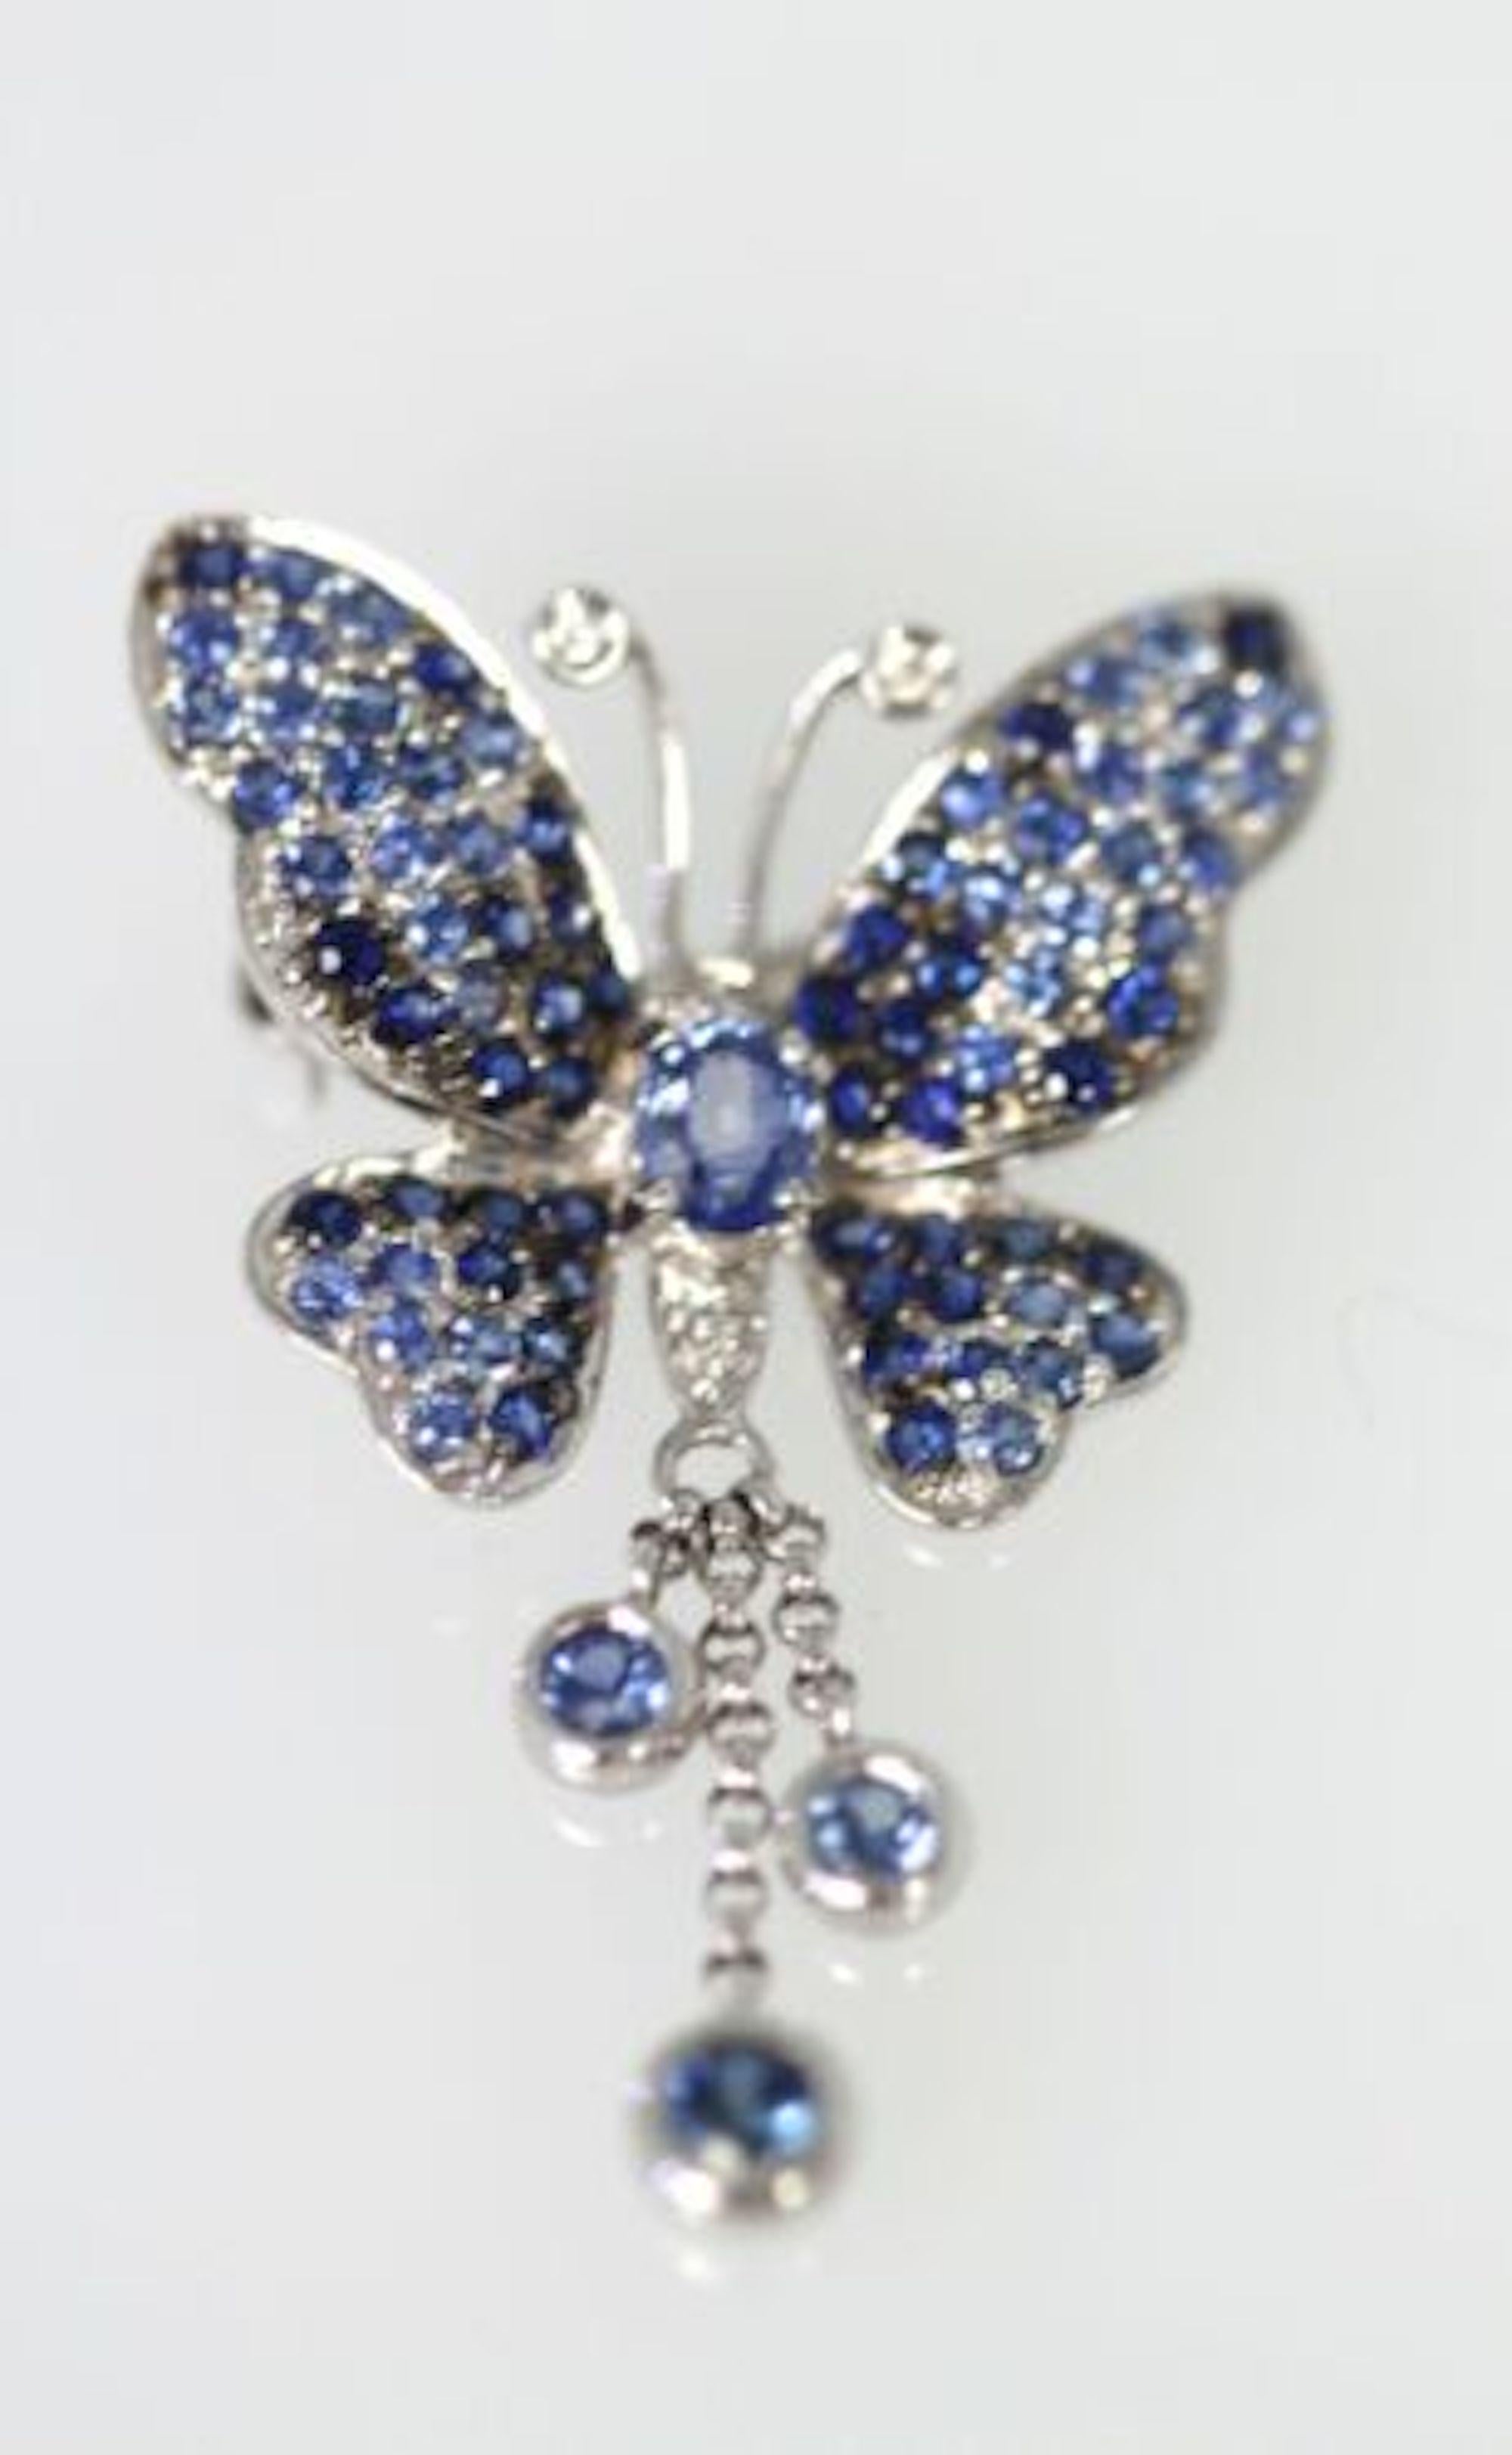 Gorgeous Sapphire, true deep blue Butterfly Brooch or Pendant Circa 1960.  This Pendant/Brooch is set in 18K White Gold.  The butterfly is regal and this gorgeous piece has a tassel of three (3) Sapphires dangling down as a tassel and with movement